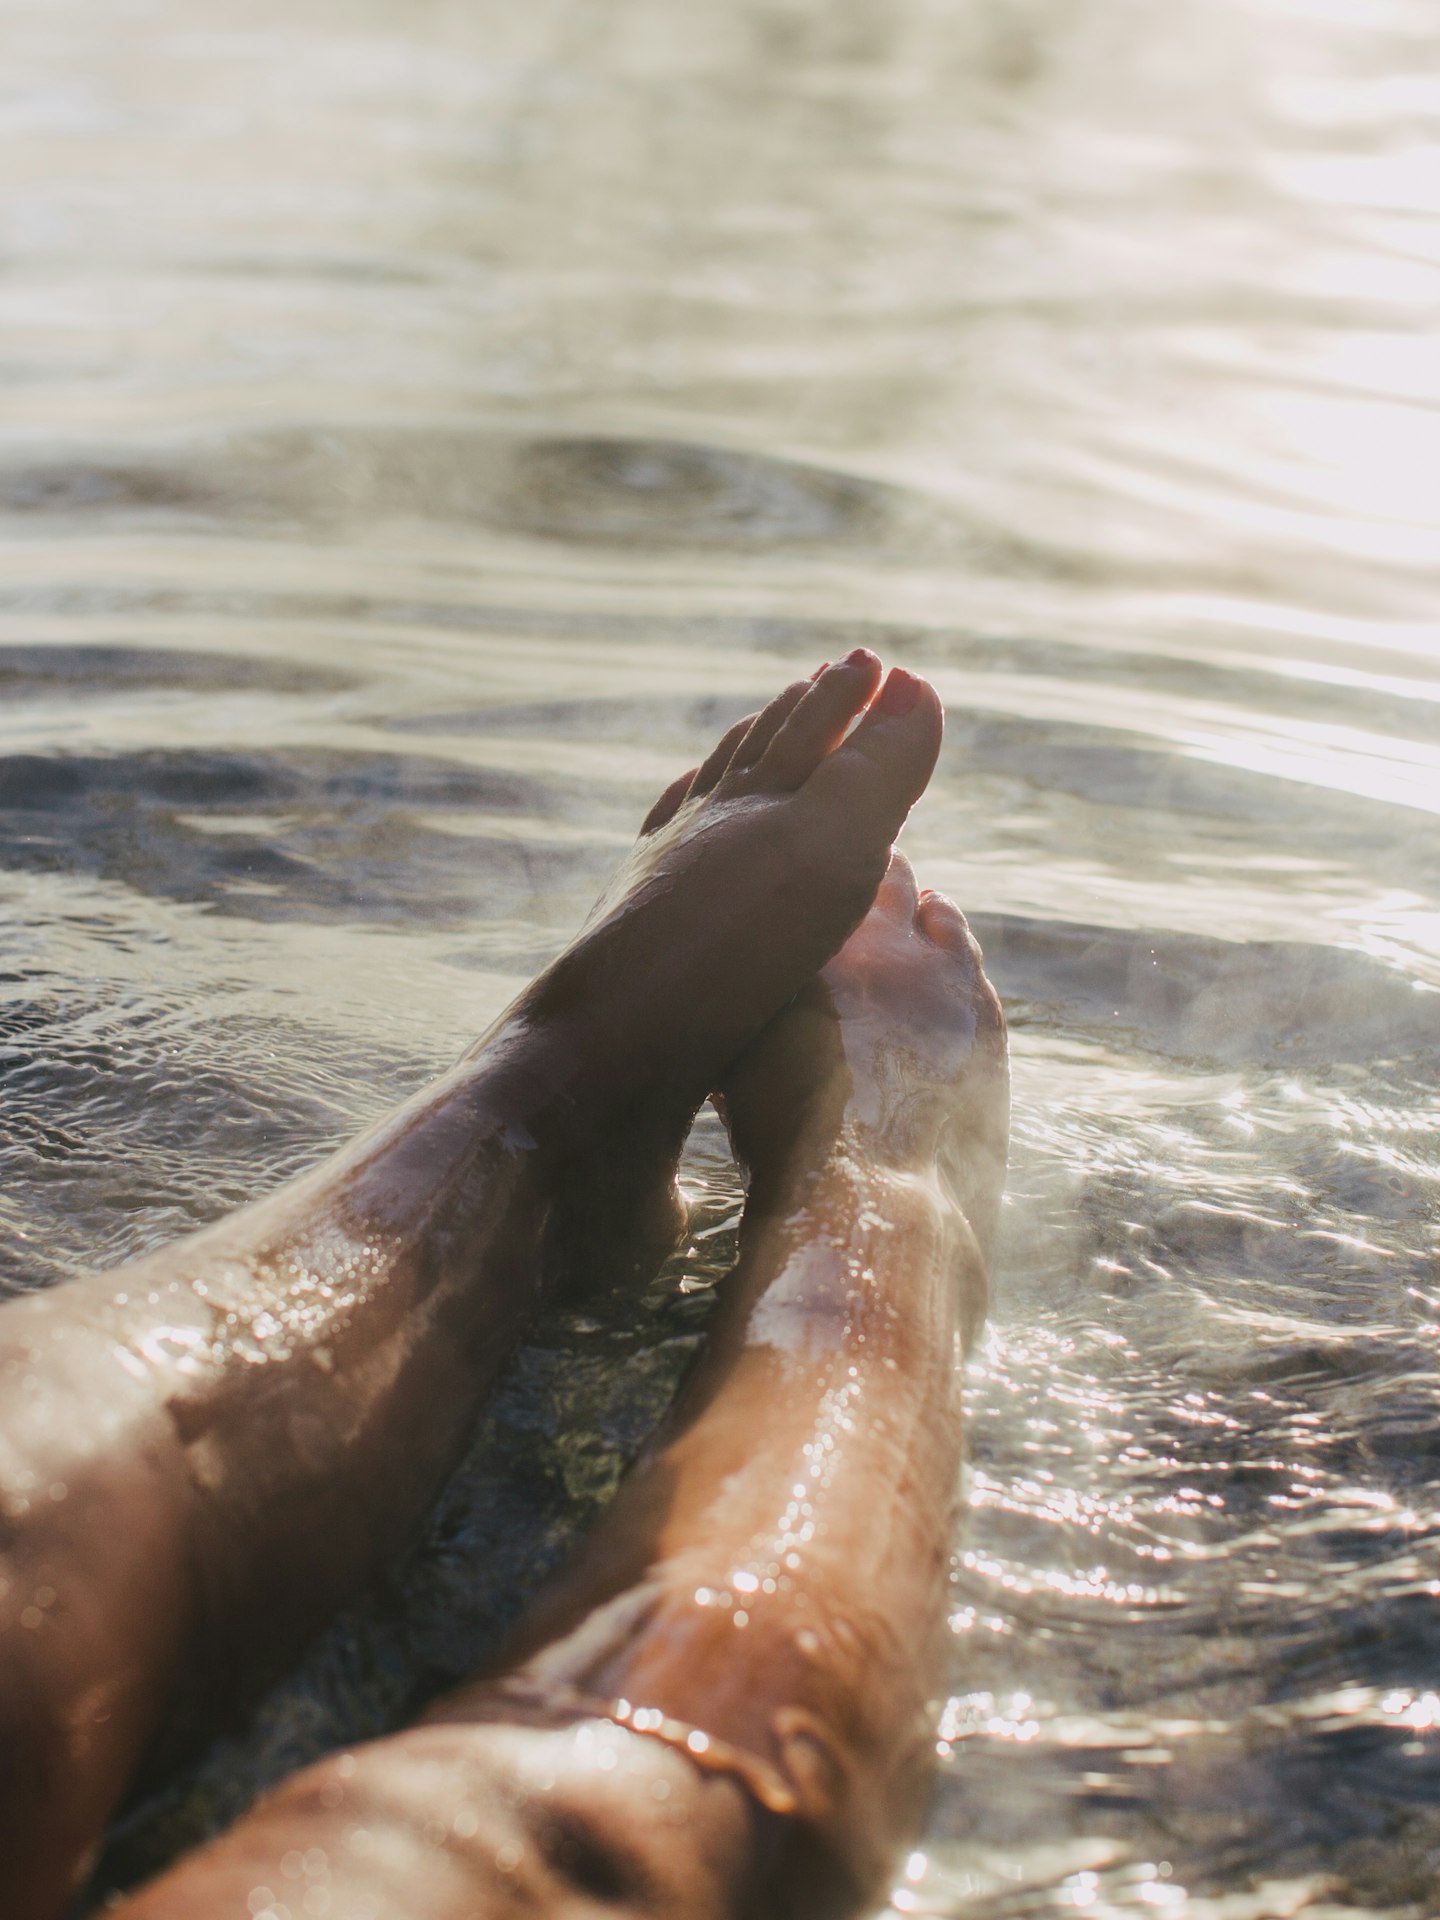 ladies legs and feet stretched out in geothermal water